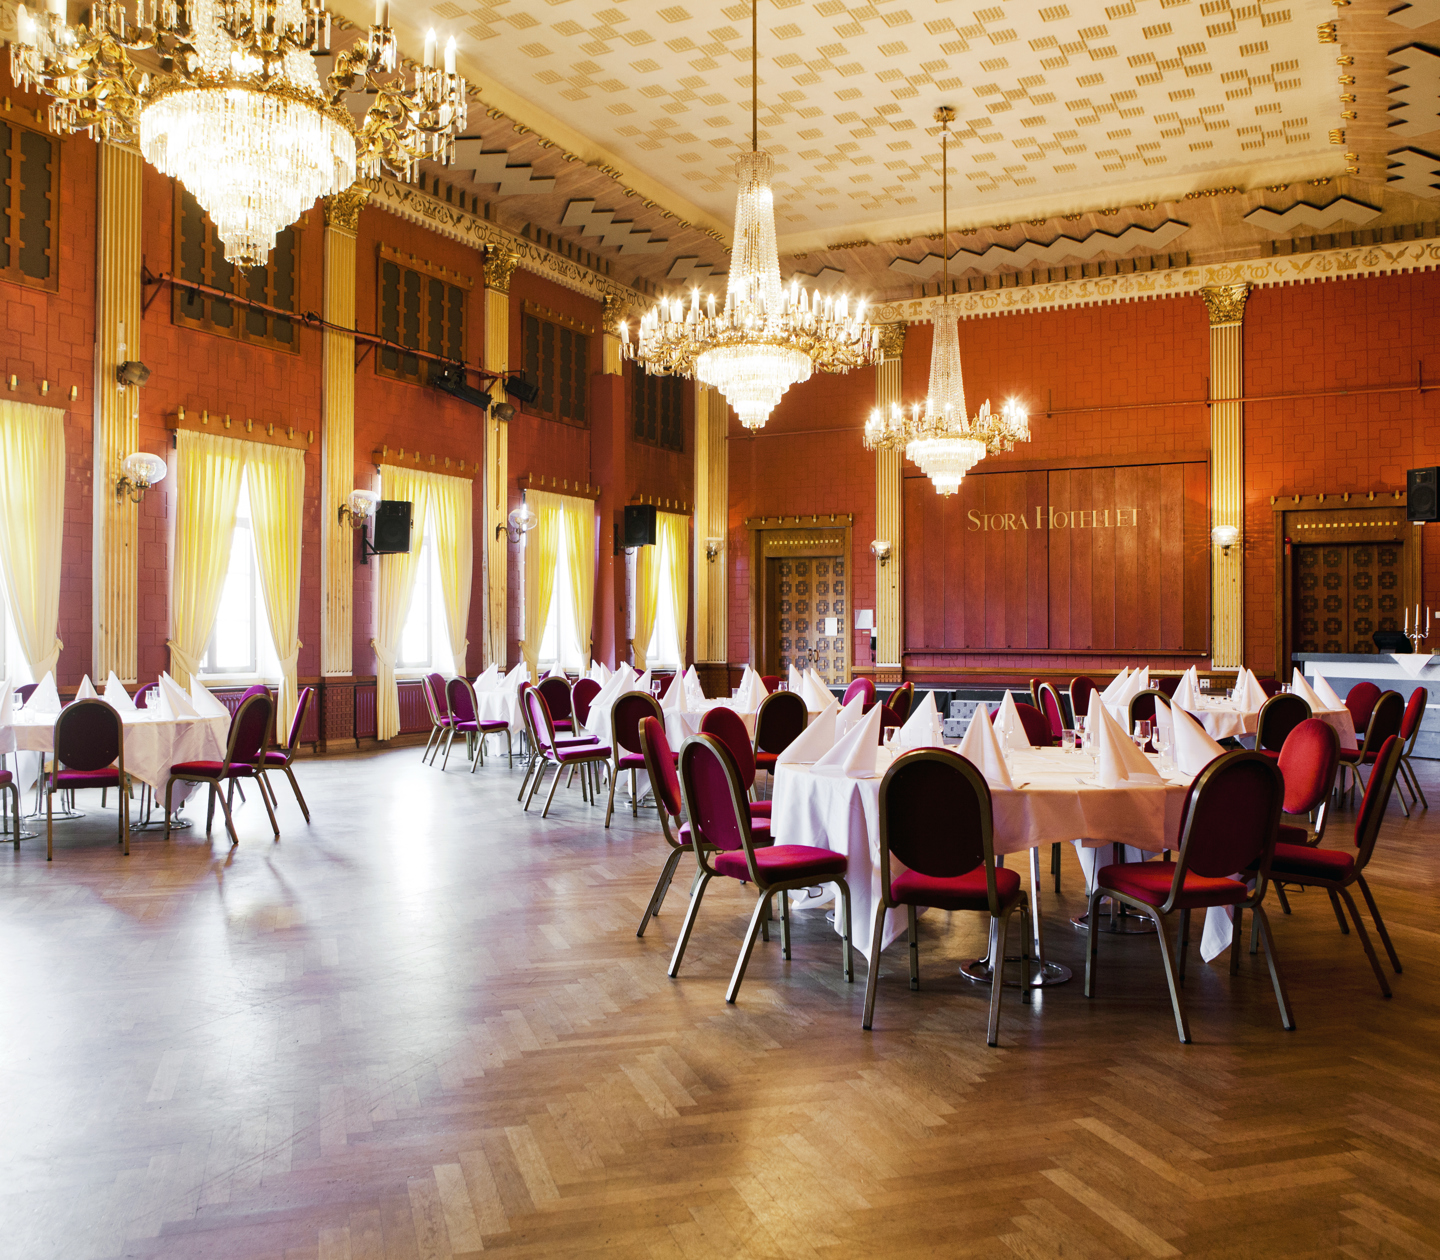 Pompous red hall with crystal chandeliers and round tables